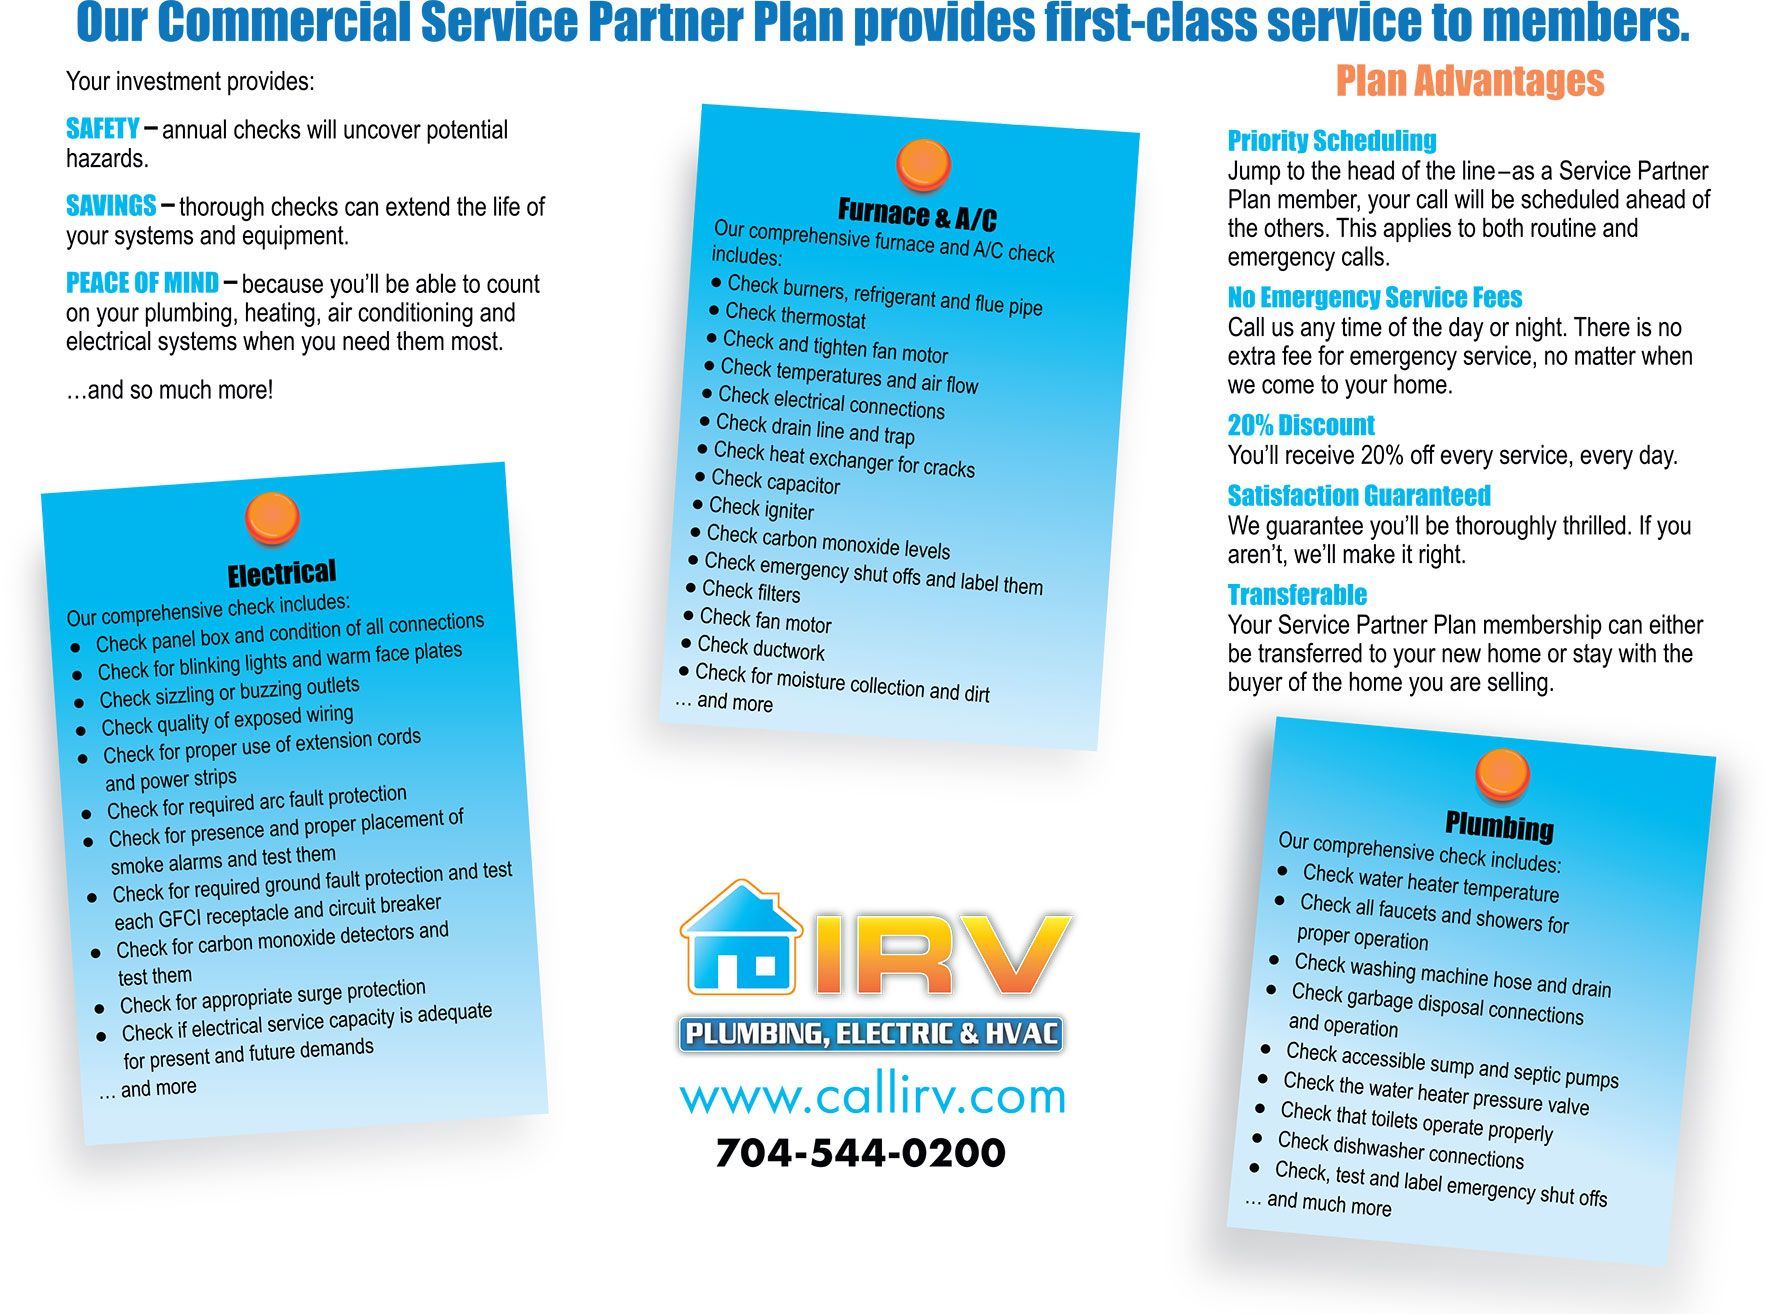 IVR plumbing brochure page 2 Commercial Service